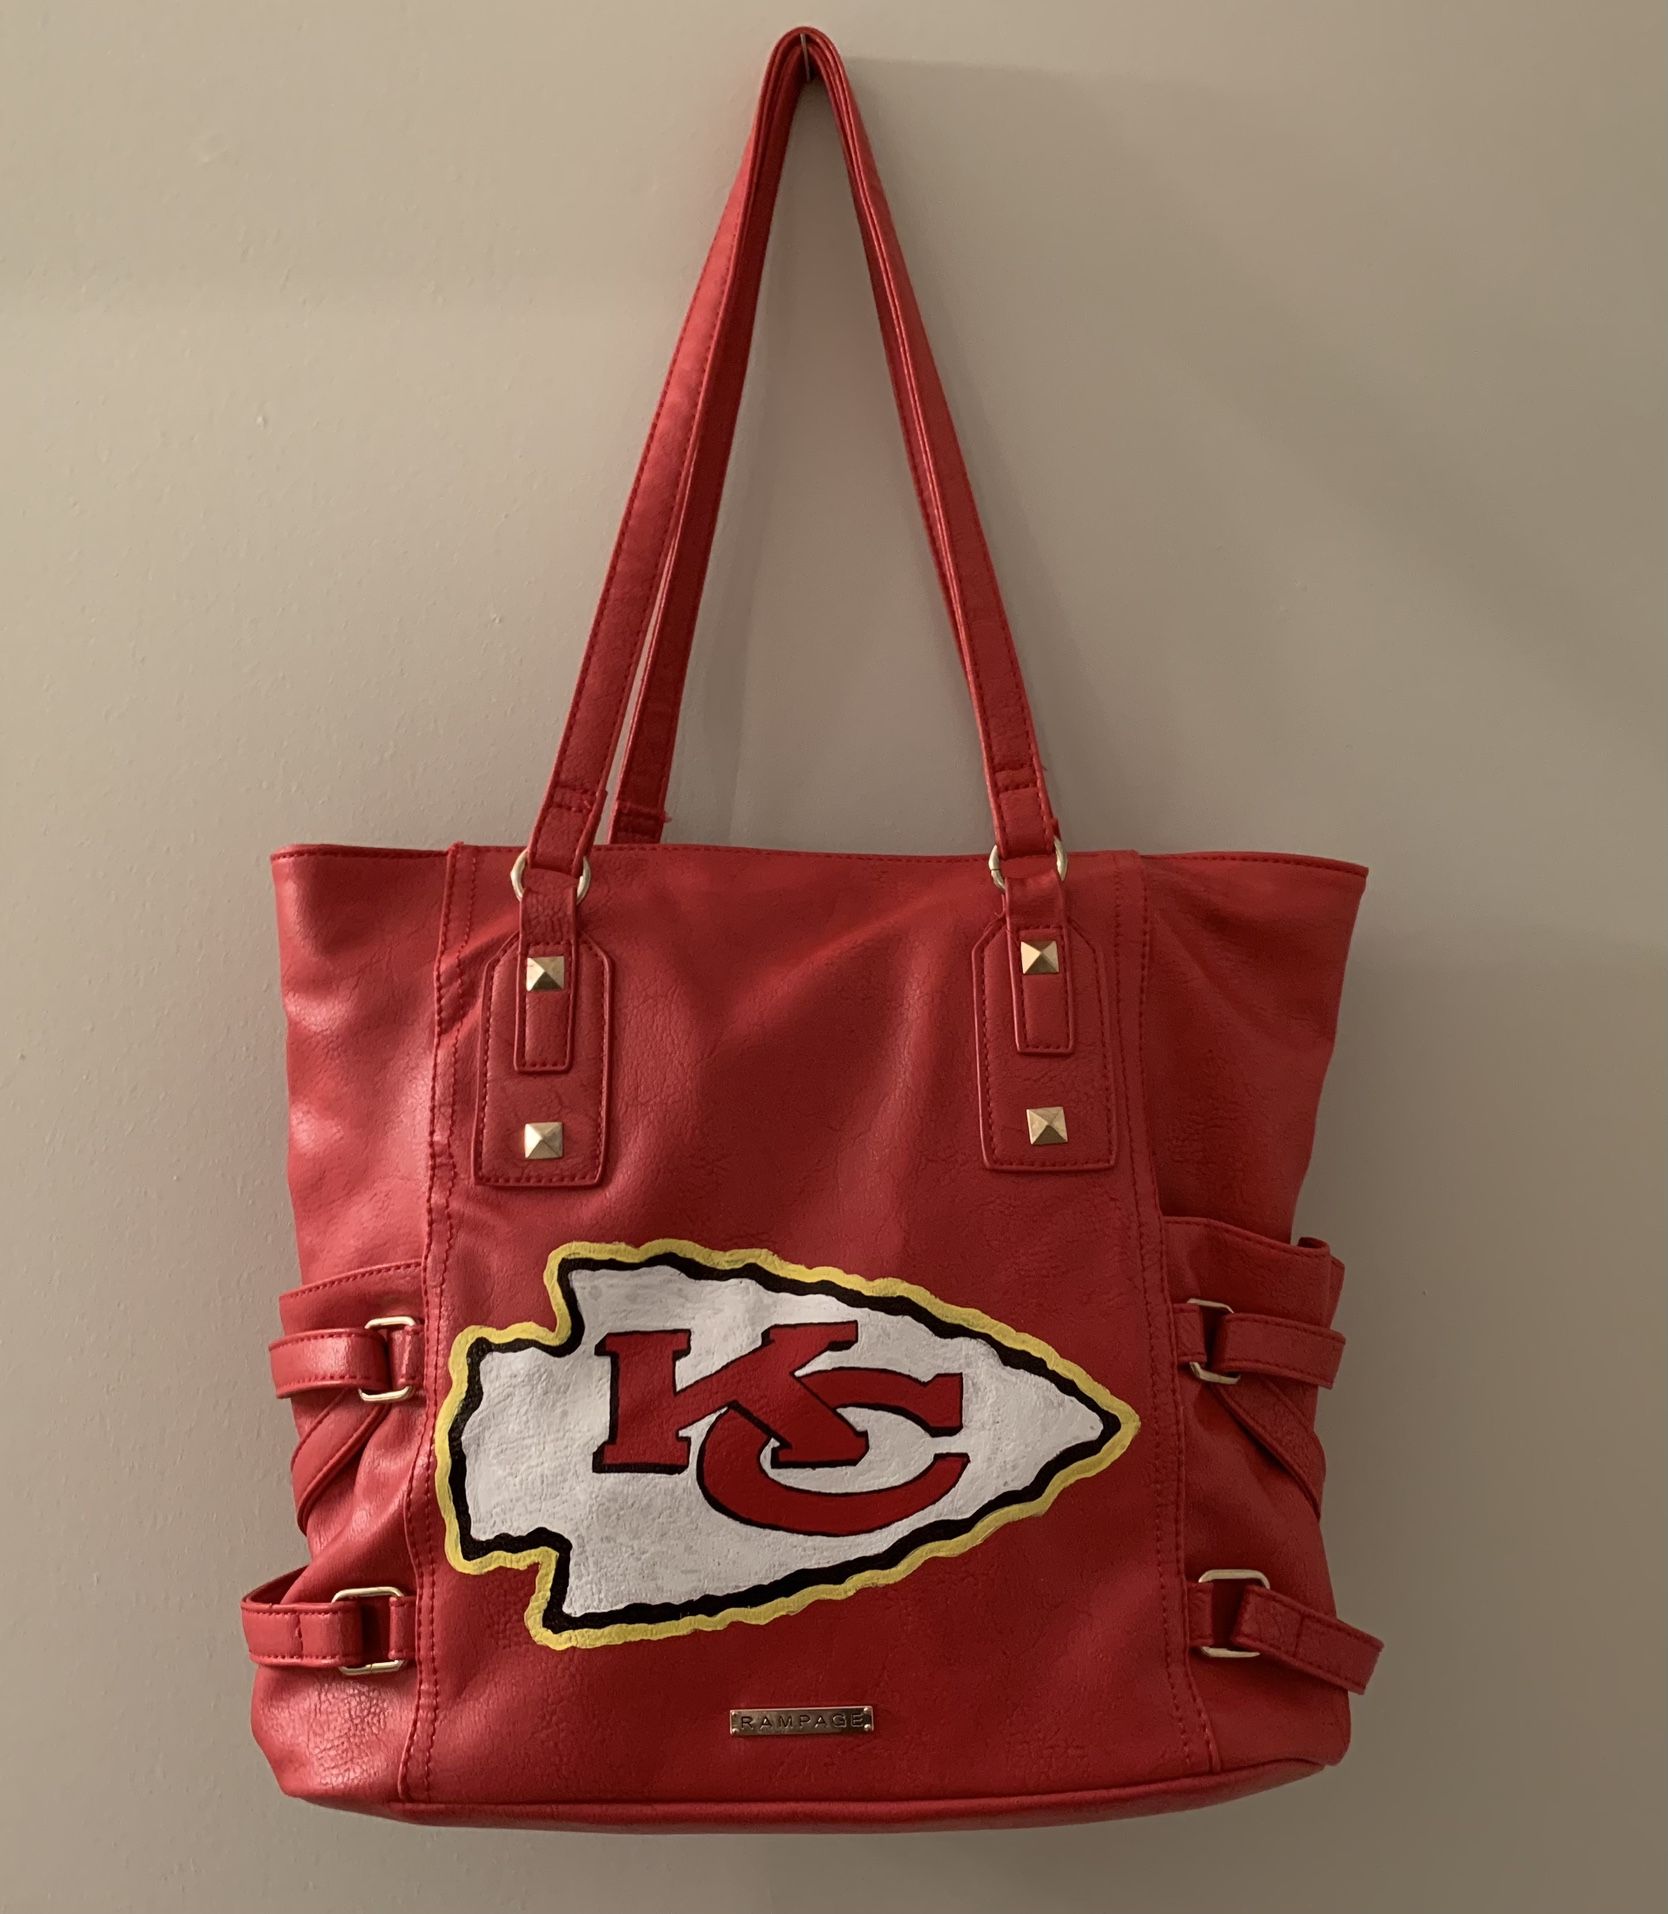 Chiefs purse, Rampage brand custom hand painted logo, excellent condition!